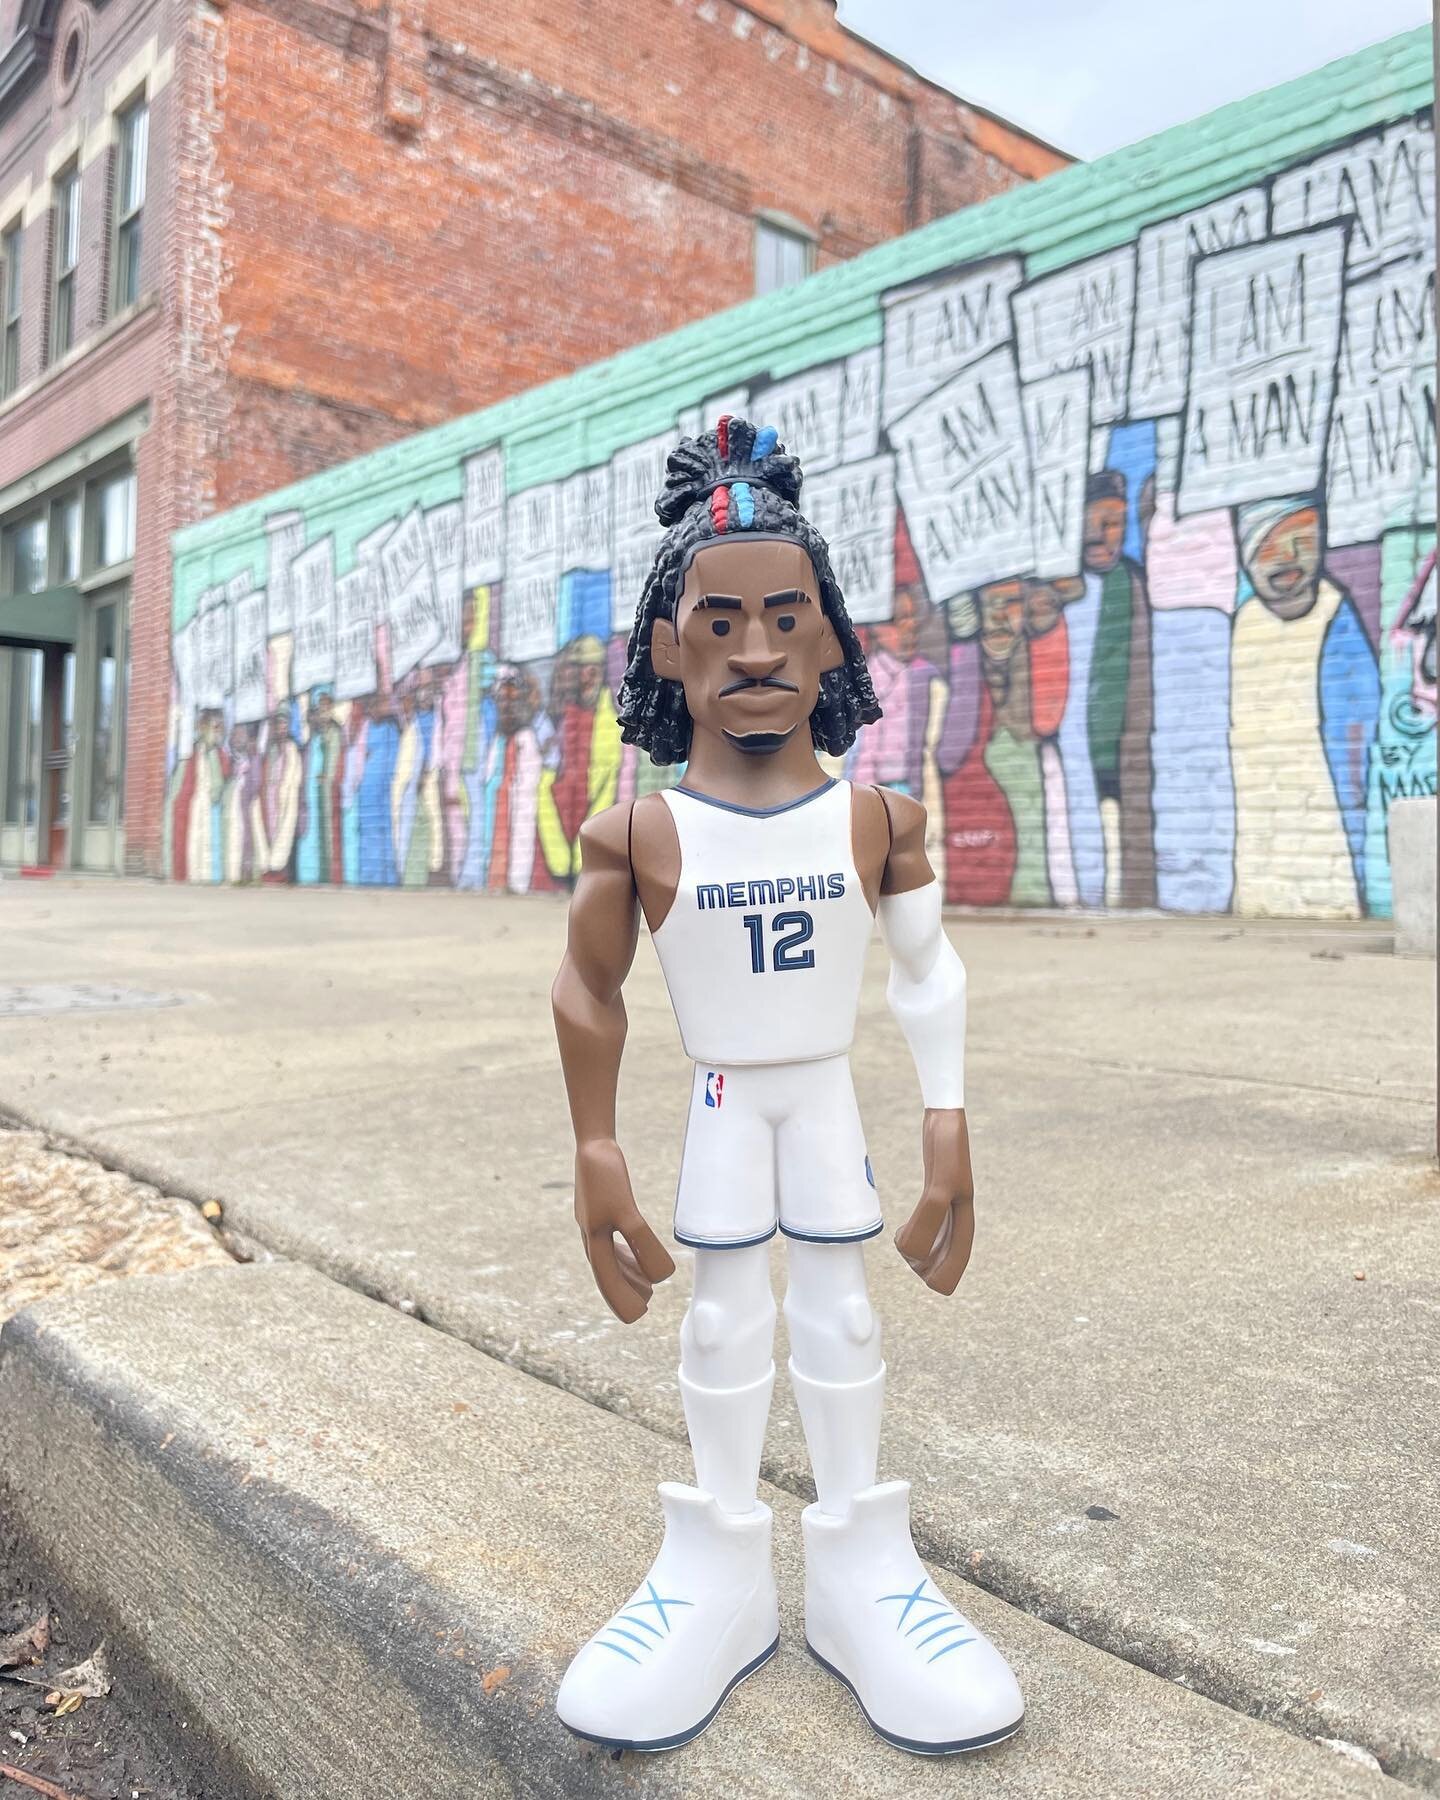 Talk about South MANE character energy! 👏 After catching a ride on the trolley, Ja strolled through the South Main District to visit all his favorite local restaurants and stores in the neighborhood, and he&rsquo;s almost ready to represent #BIGMEMP